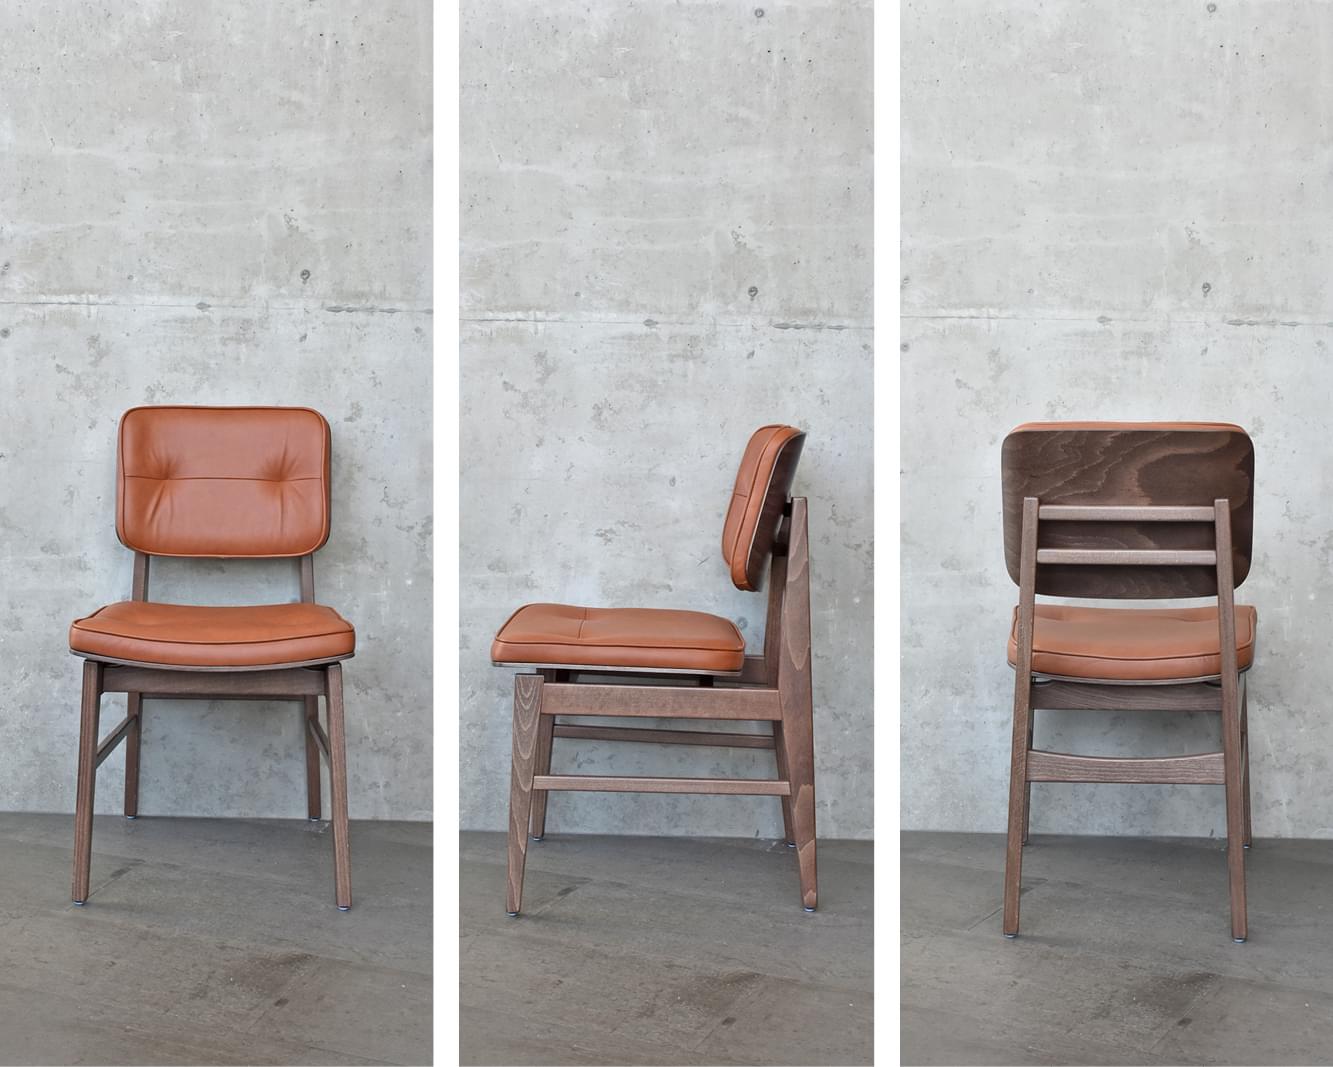 Hardwick chair - New 70s style furniture as seen at the Salone del Mobile Milano April, 2019